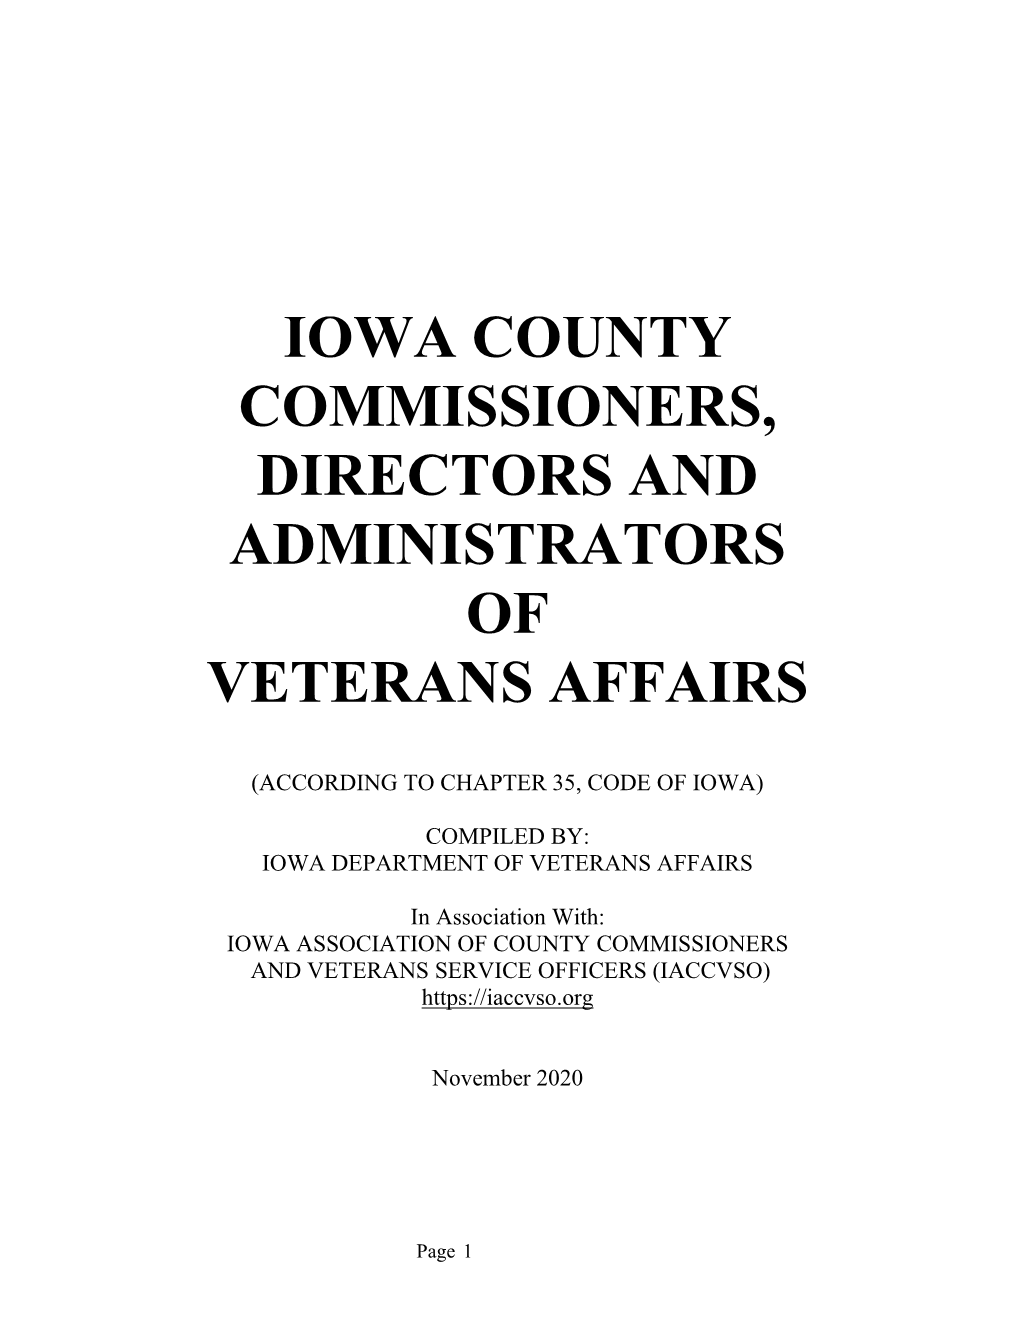 Iowa County Commissioners, Directors and Administrators of Veterans Affairs